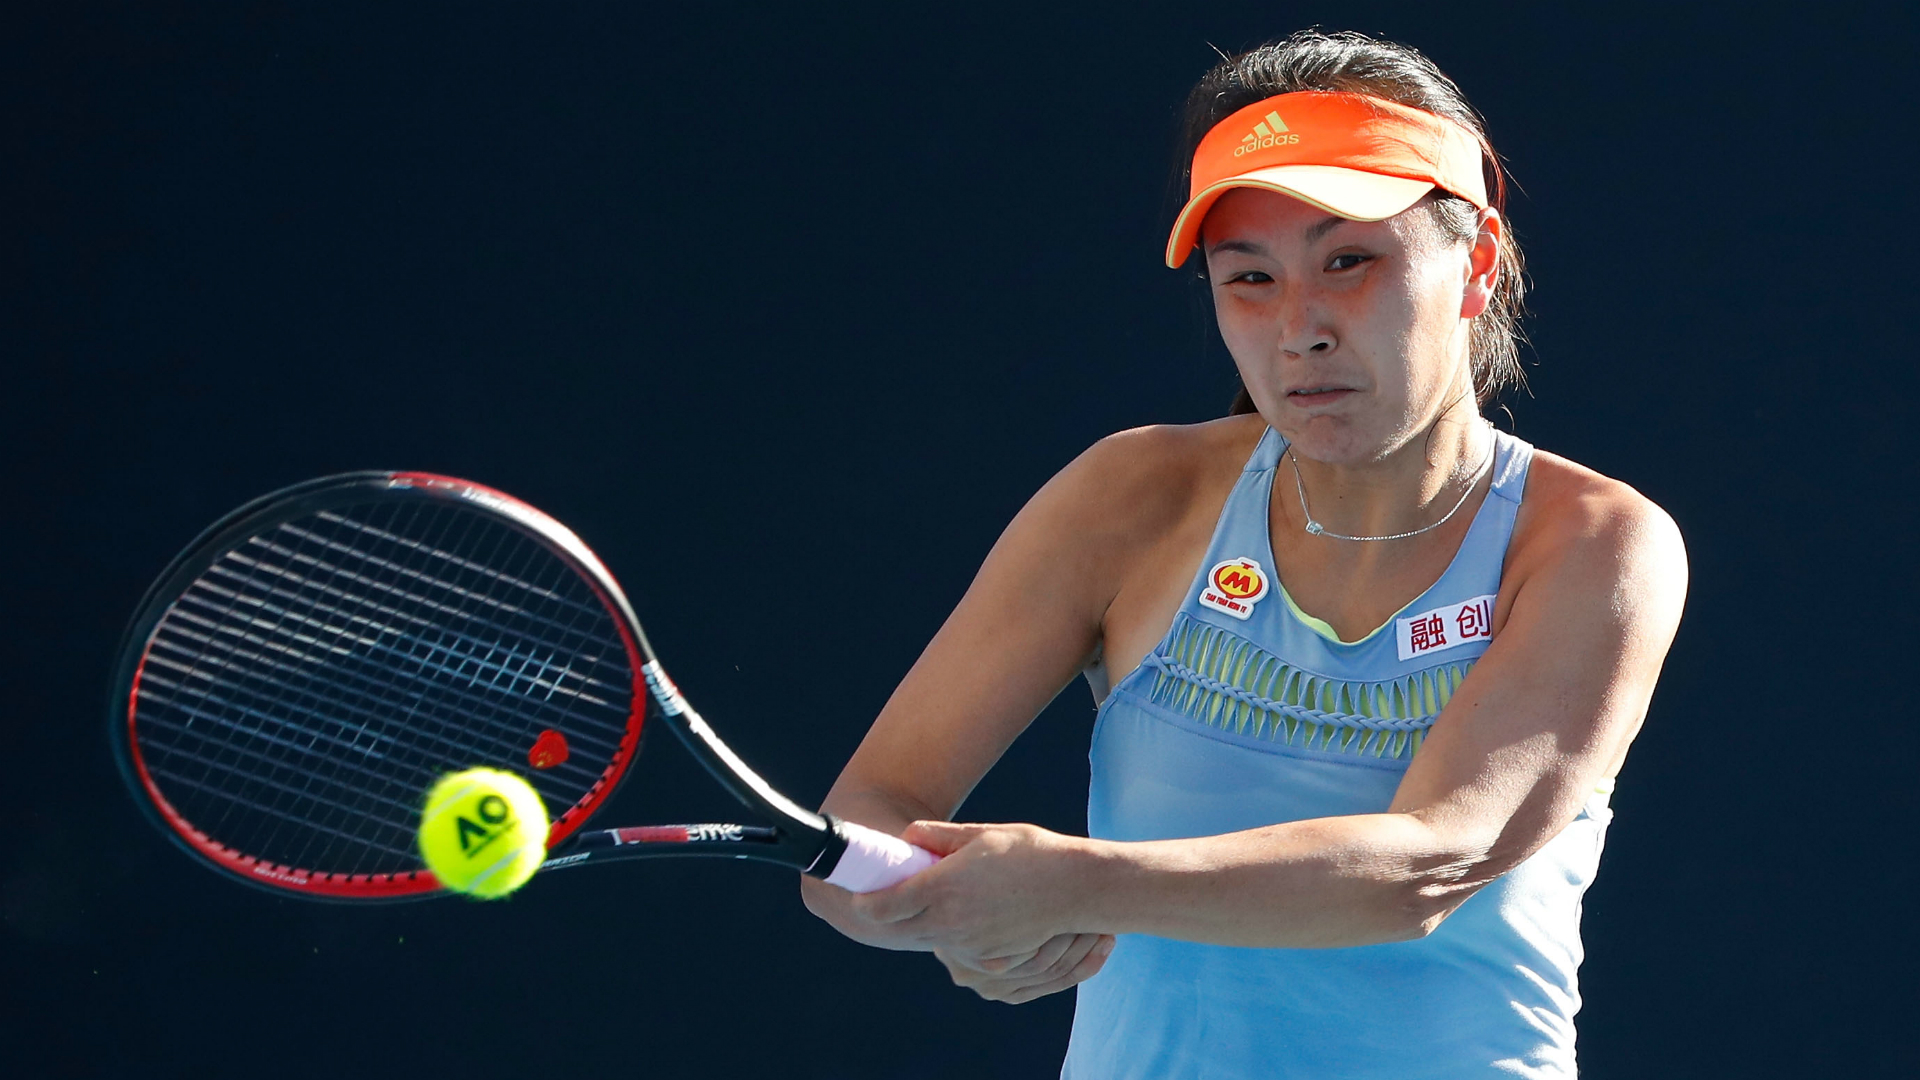 Peng Shuai came from behind to beat Lauren Davis at the Oracle Challenger Series Houston.